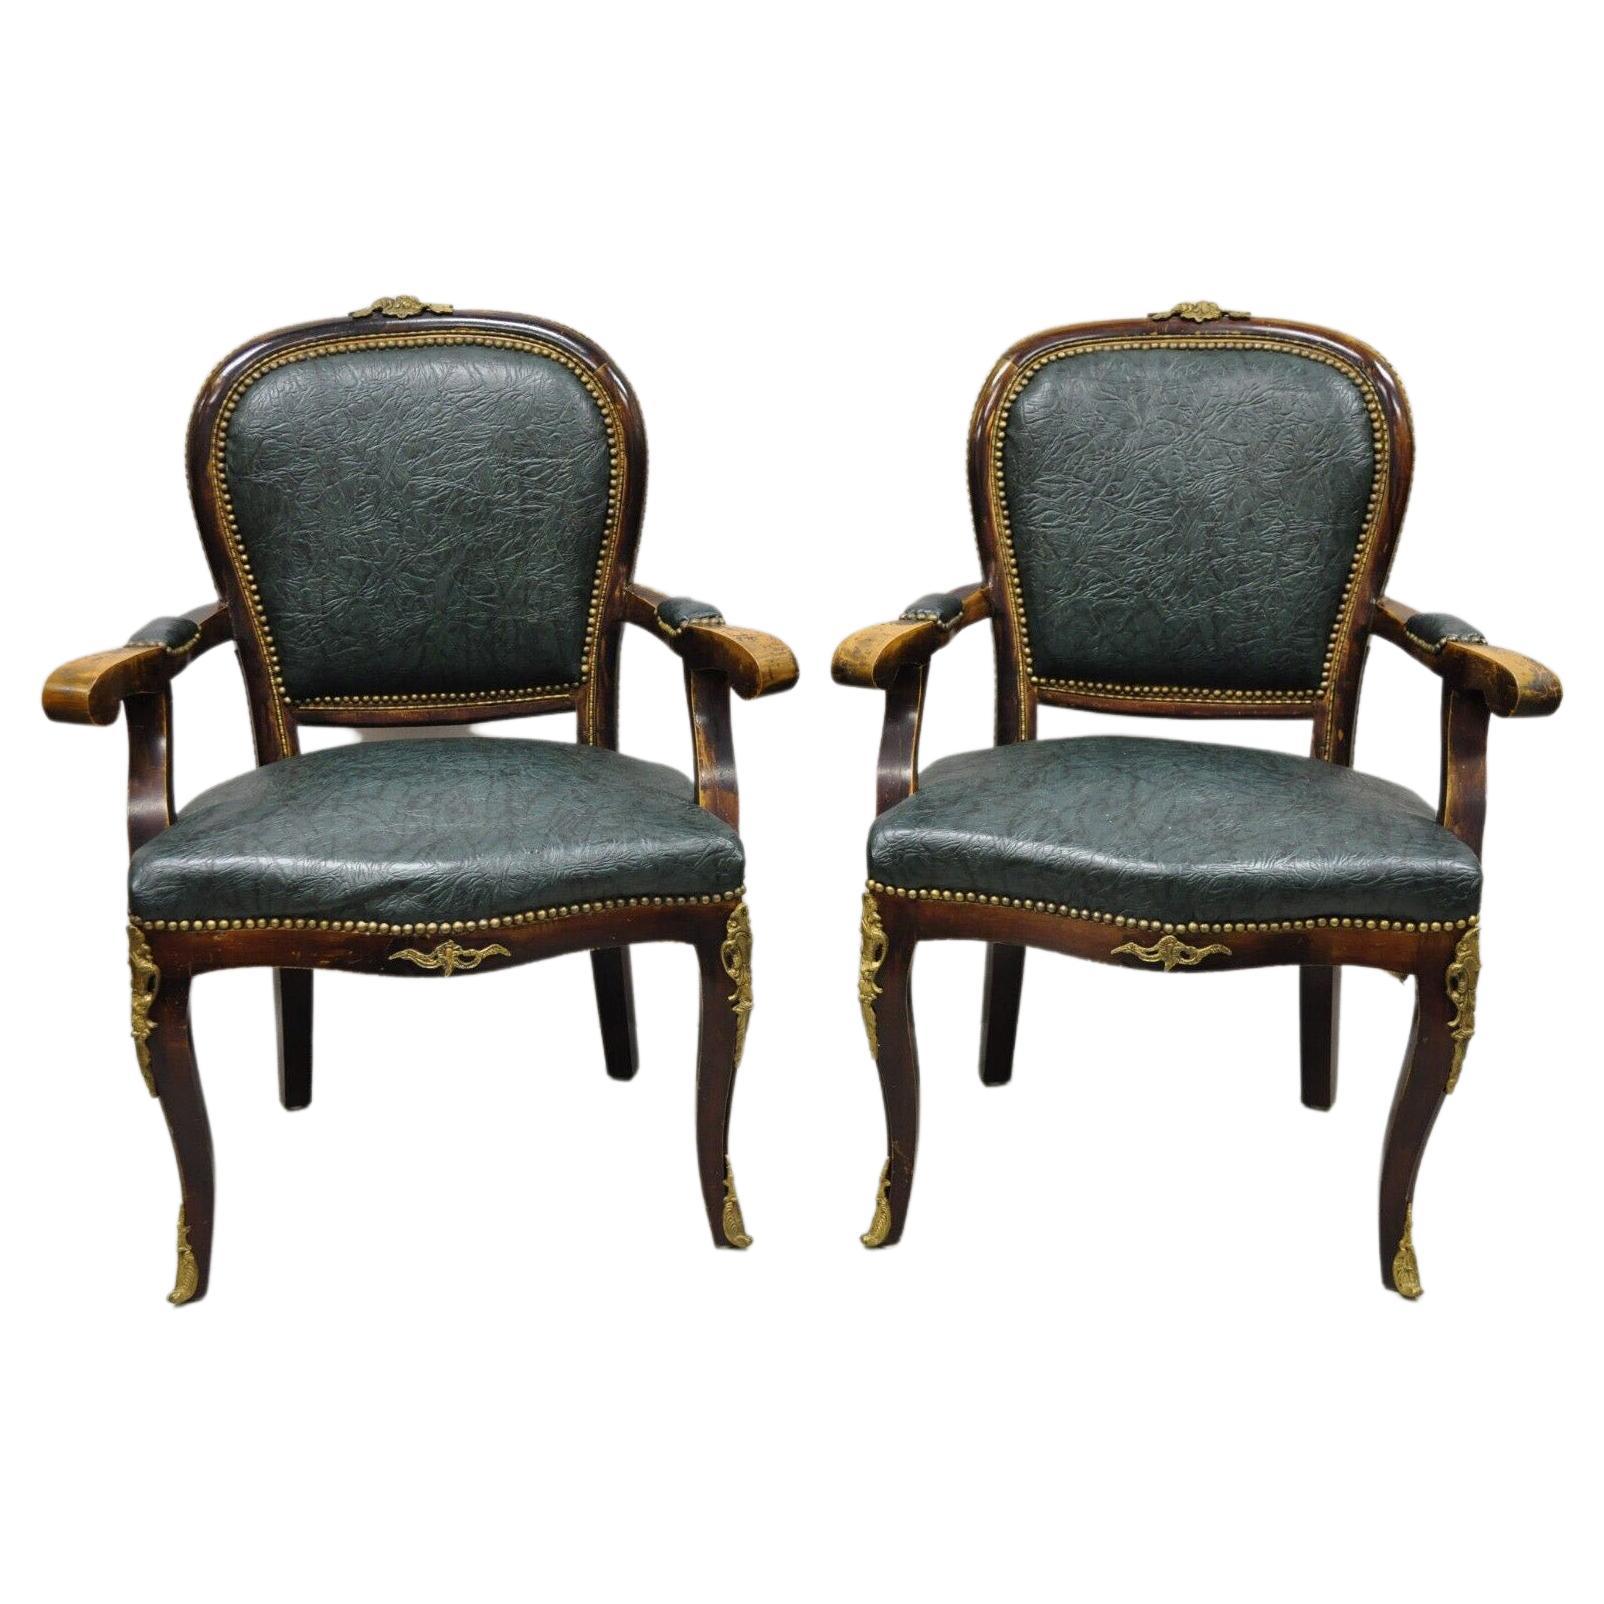 Vintage French Louis XV Style Solid Wood Bronze Ormolu Arm Chairs - a Pair For Sale